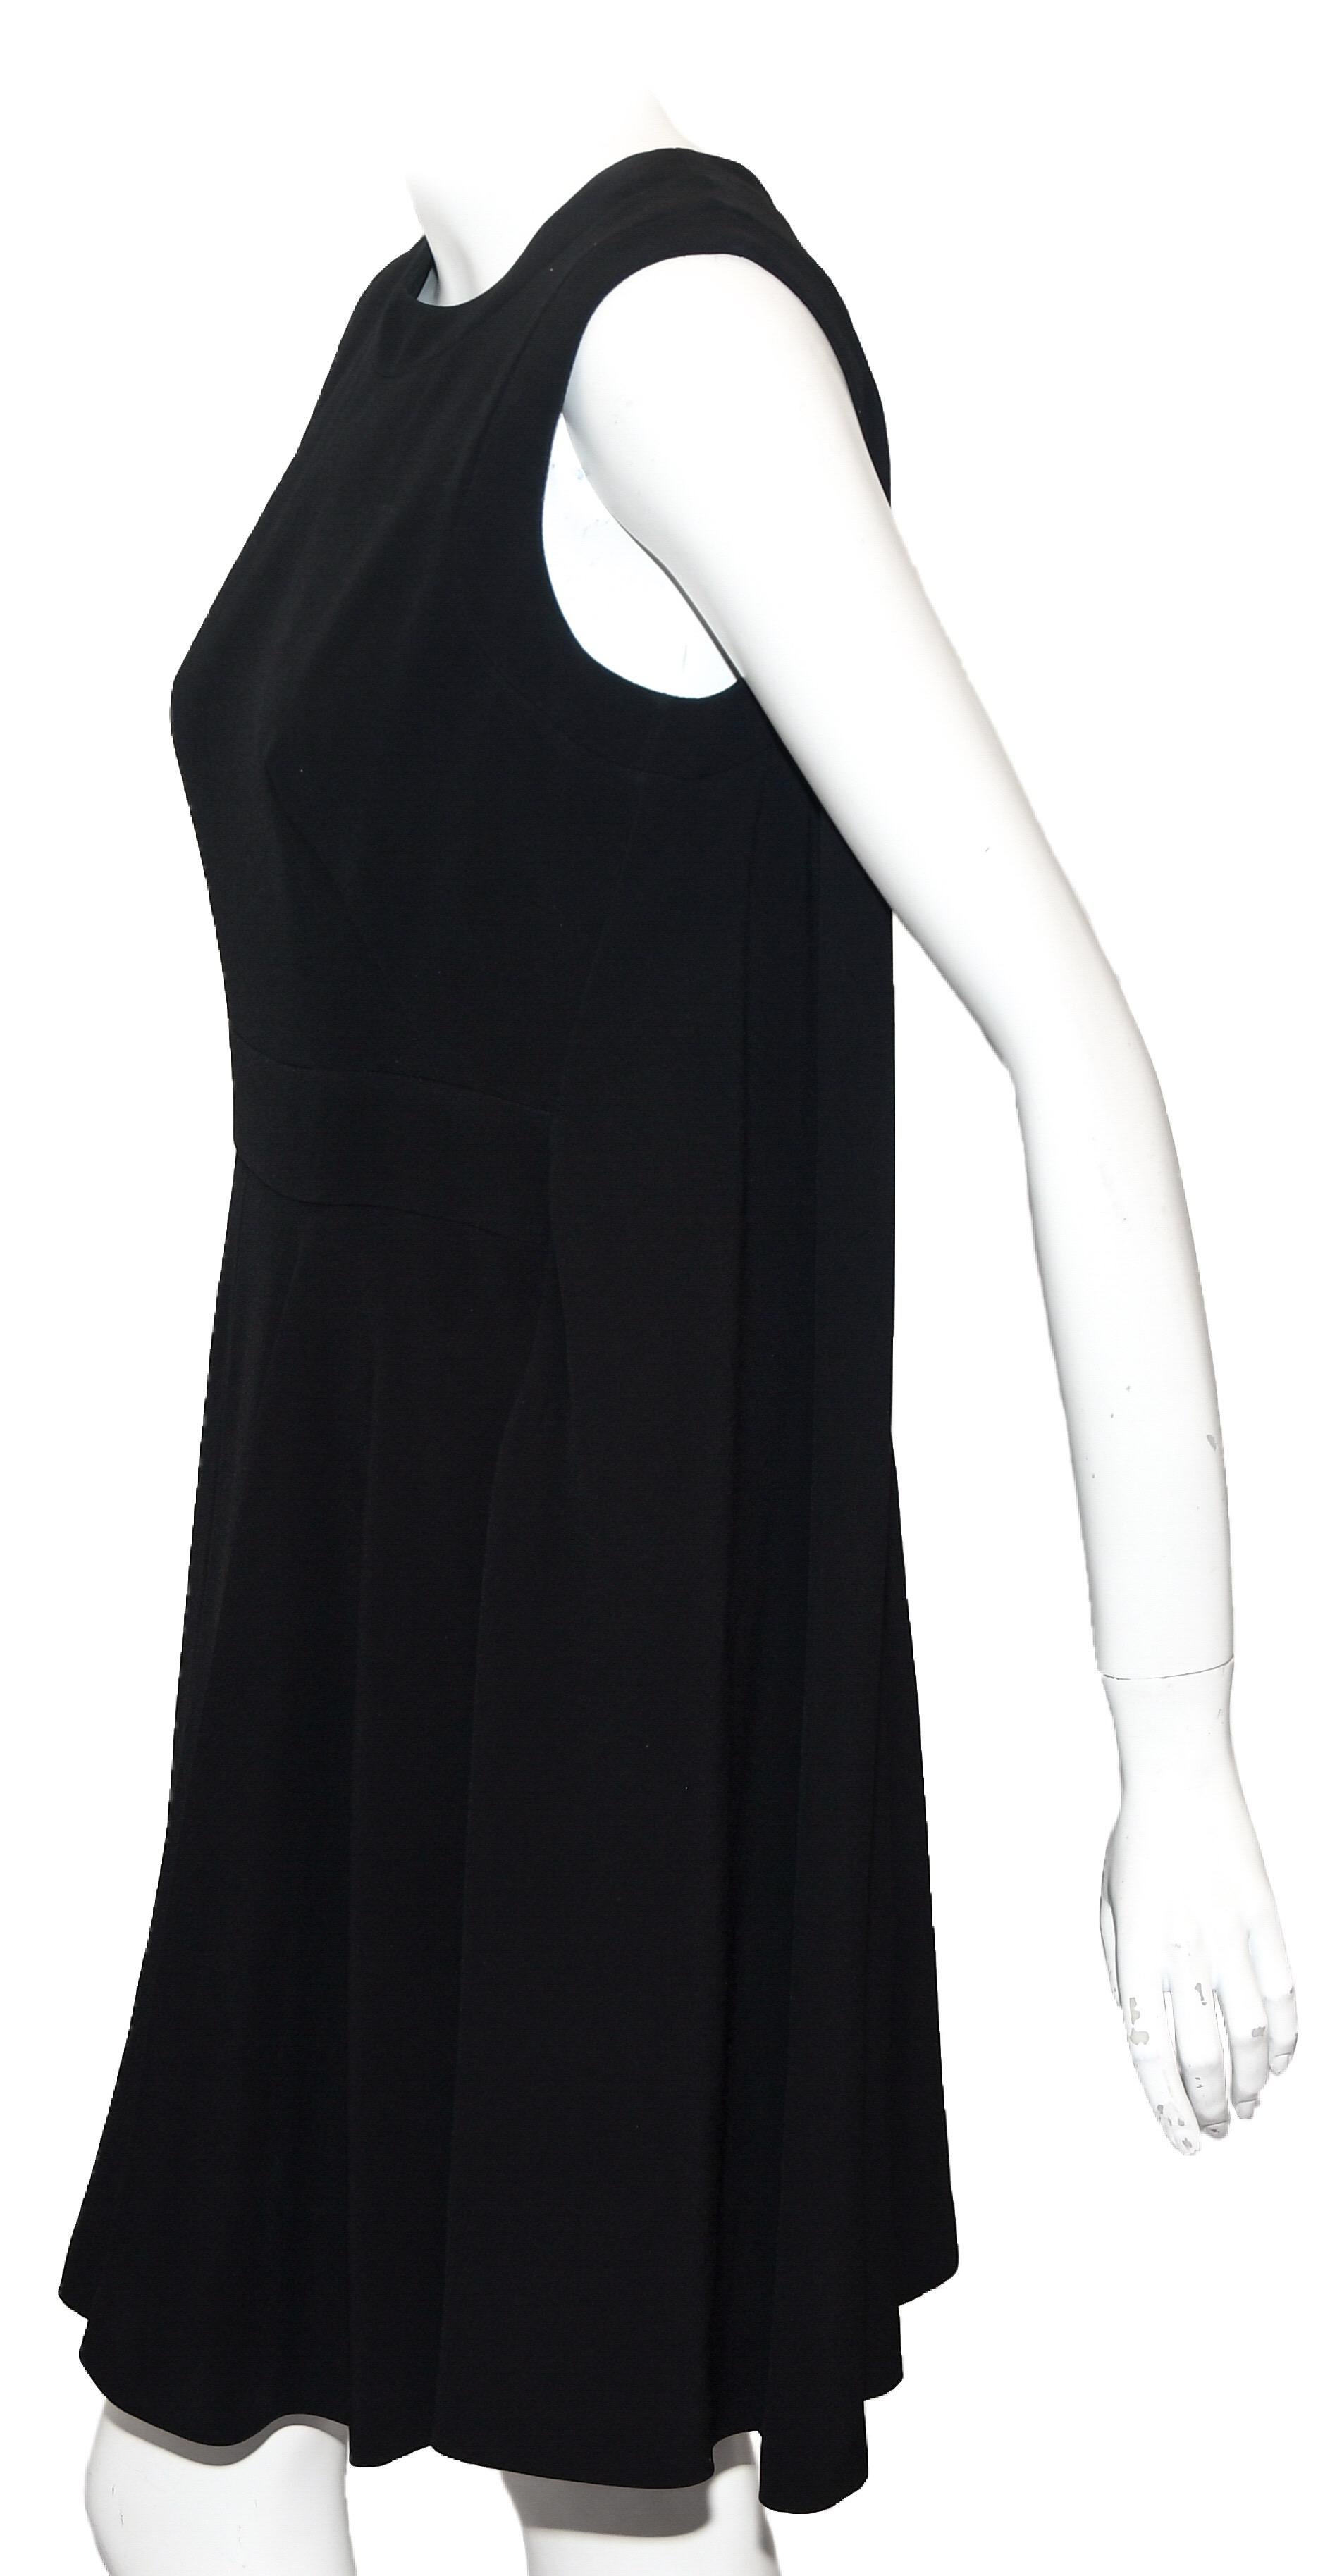 Alexander McQueen black sleeveless paneled dress is loose fitting and evokes the trapeze dresses of the 1960s.  Silk dress features round collar, pleated skirt, 2 panels on each side, and hidden rear zipper with hook and eye closure.  Large, rear